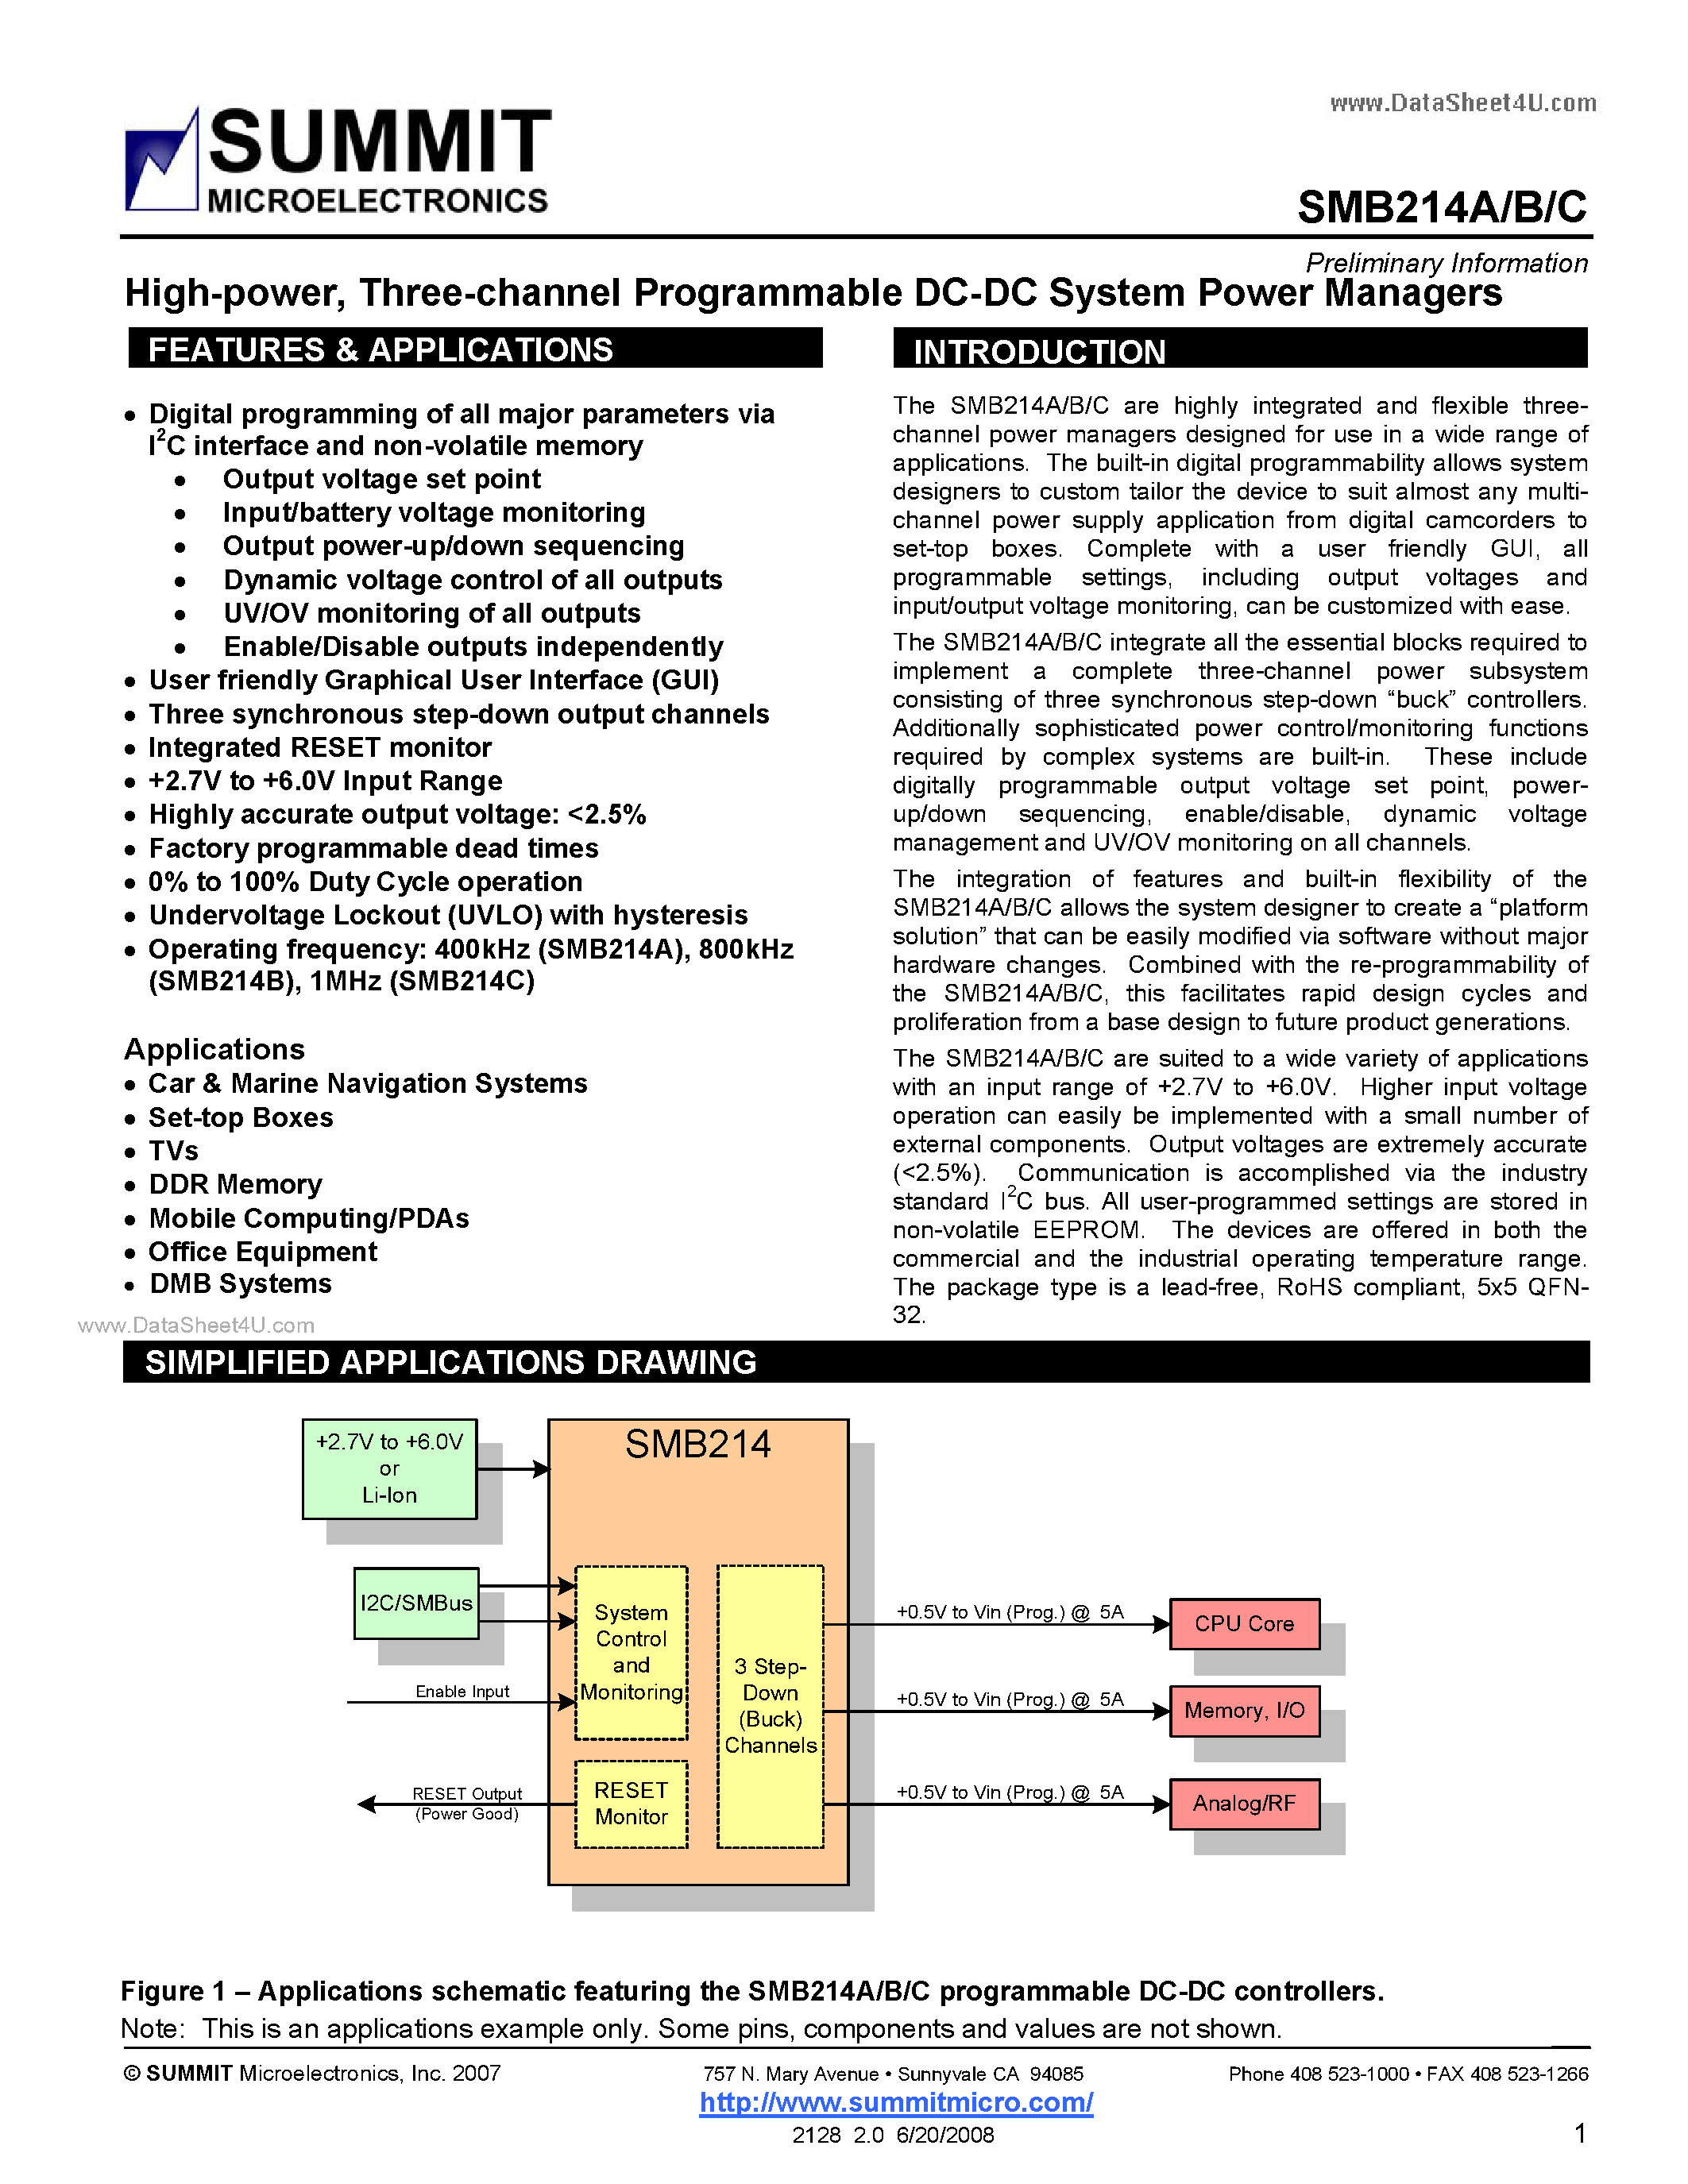 Datasheet SMB214A - Three-channel Programmable DC-DC System Power Managers page 1